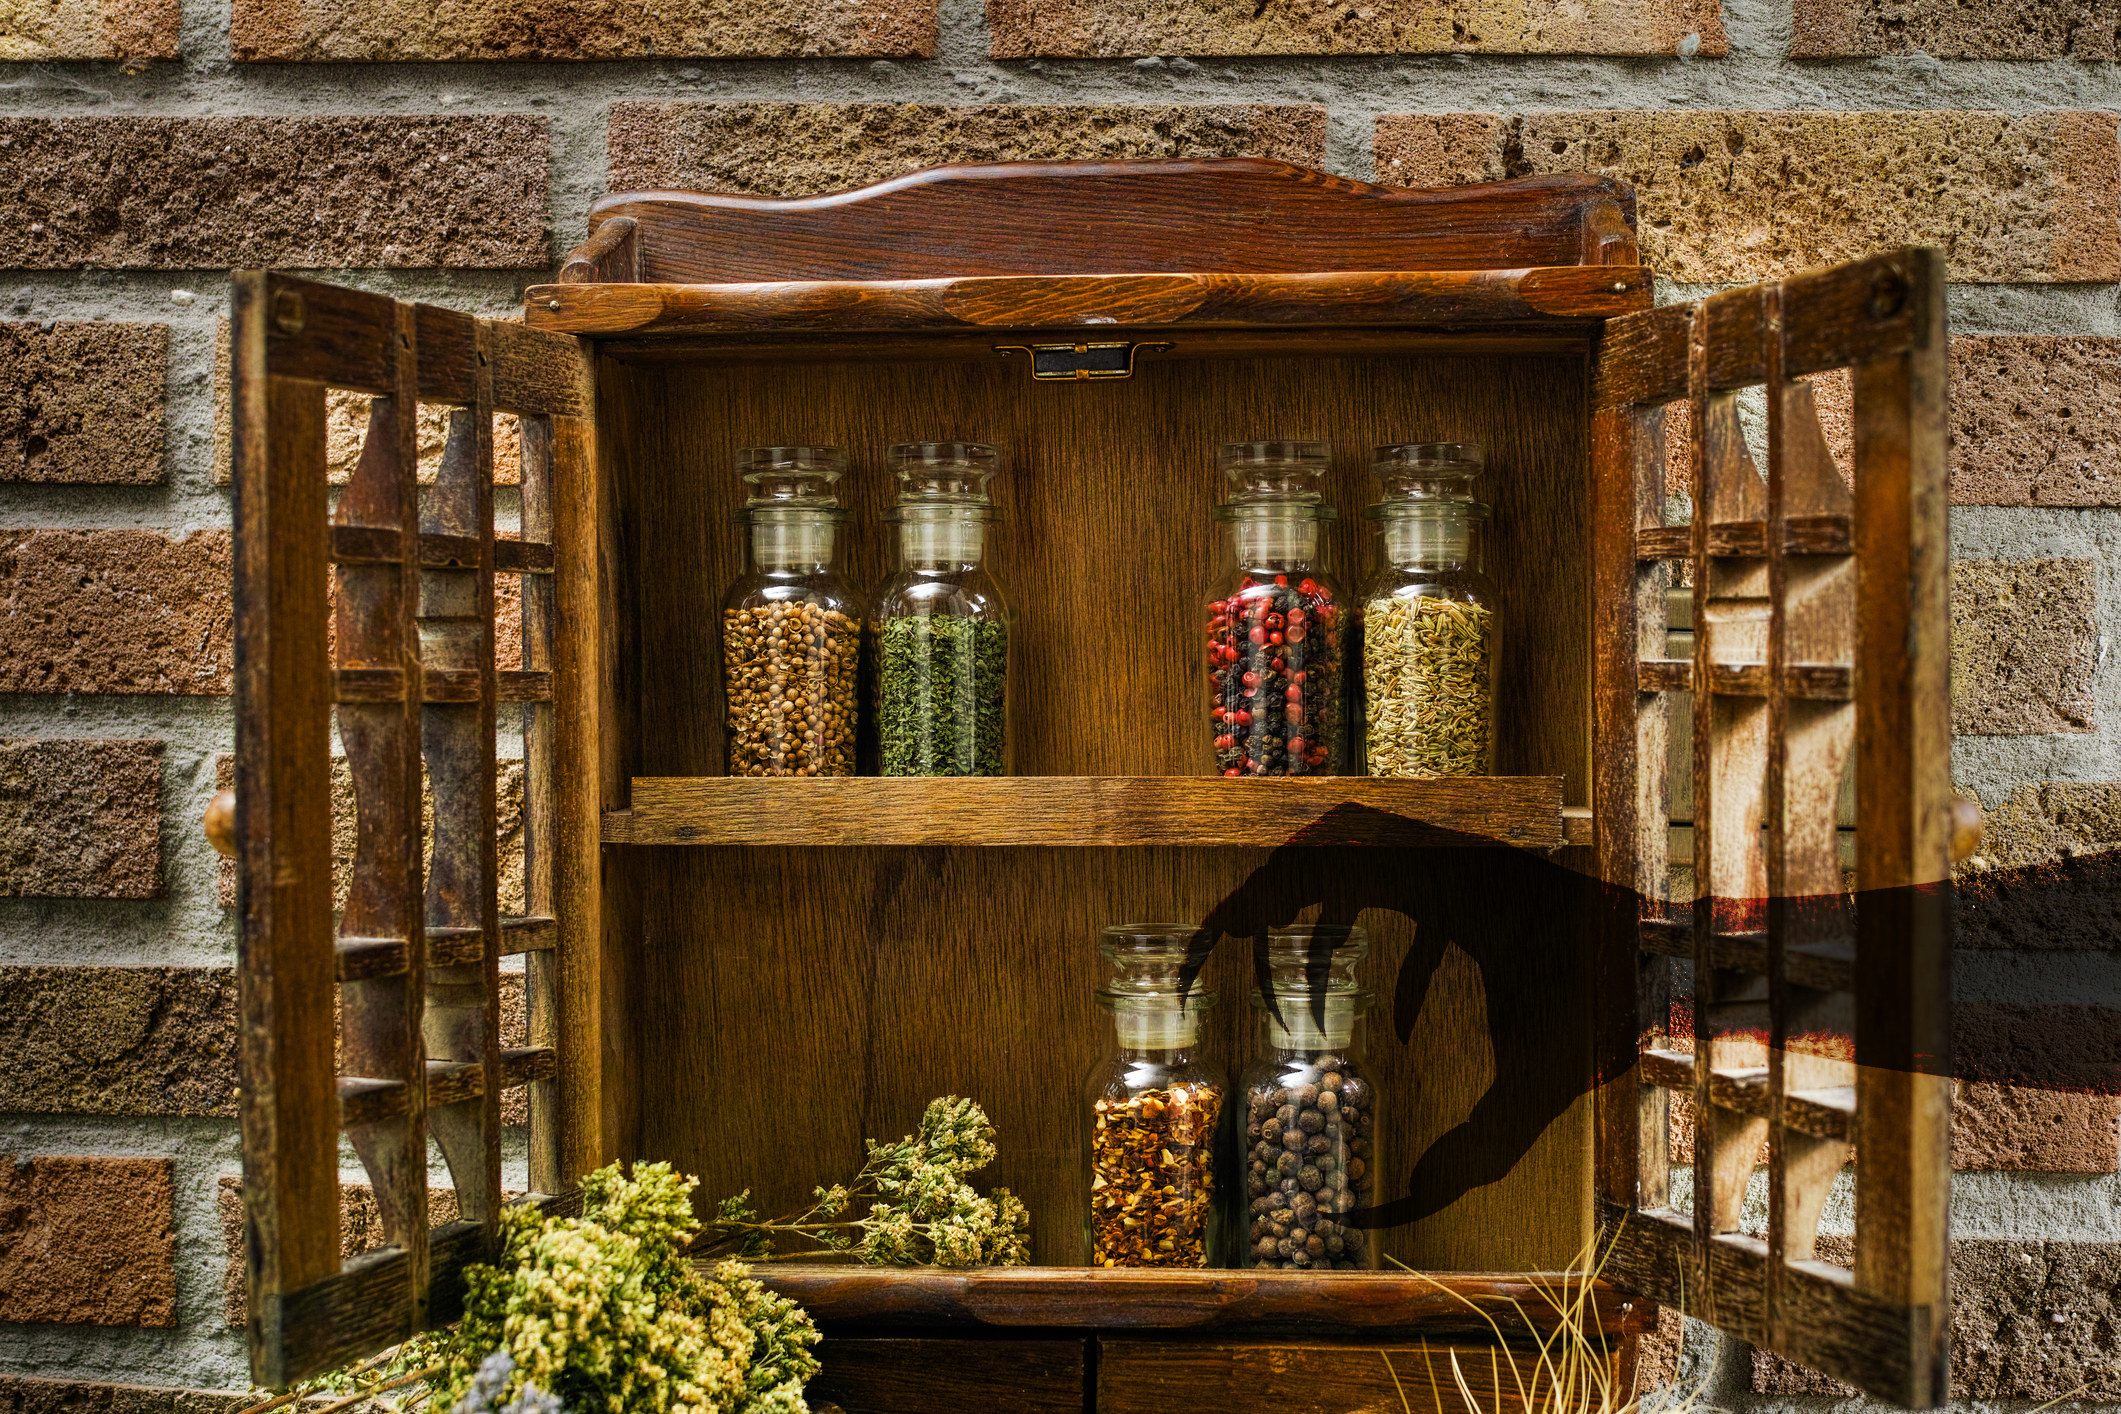 An opened spice rack